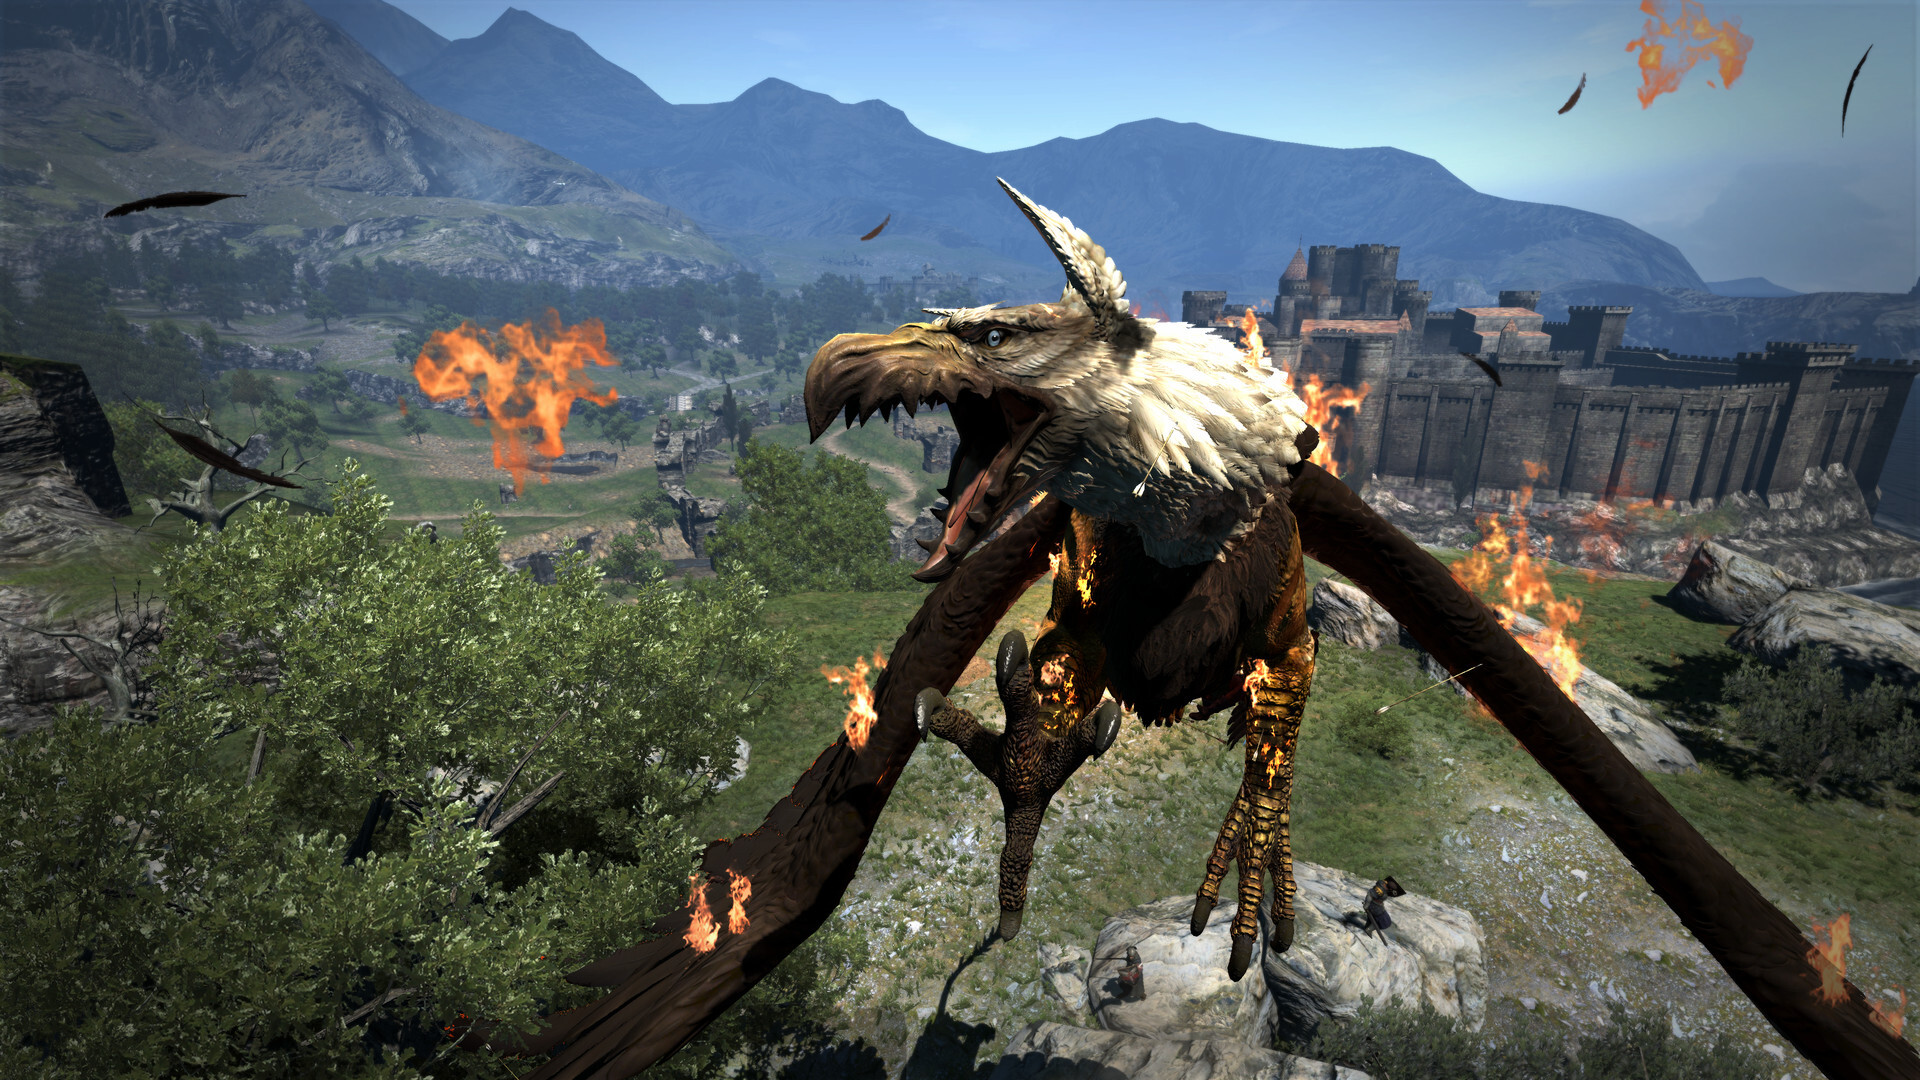 Why Did Capcom Leave Co-Op Multiplayer Out Of Dragon's Dogma 2?